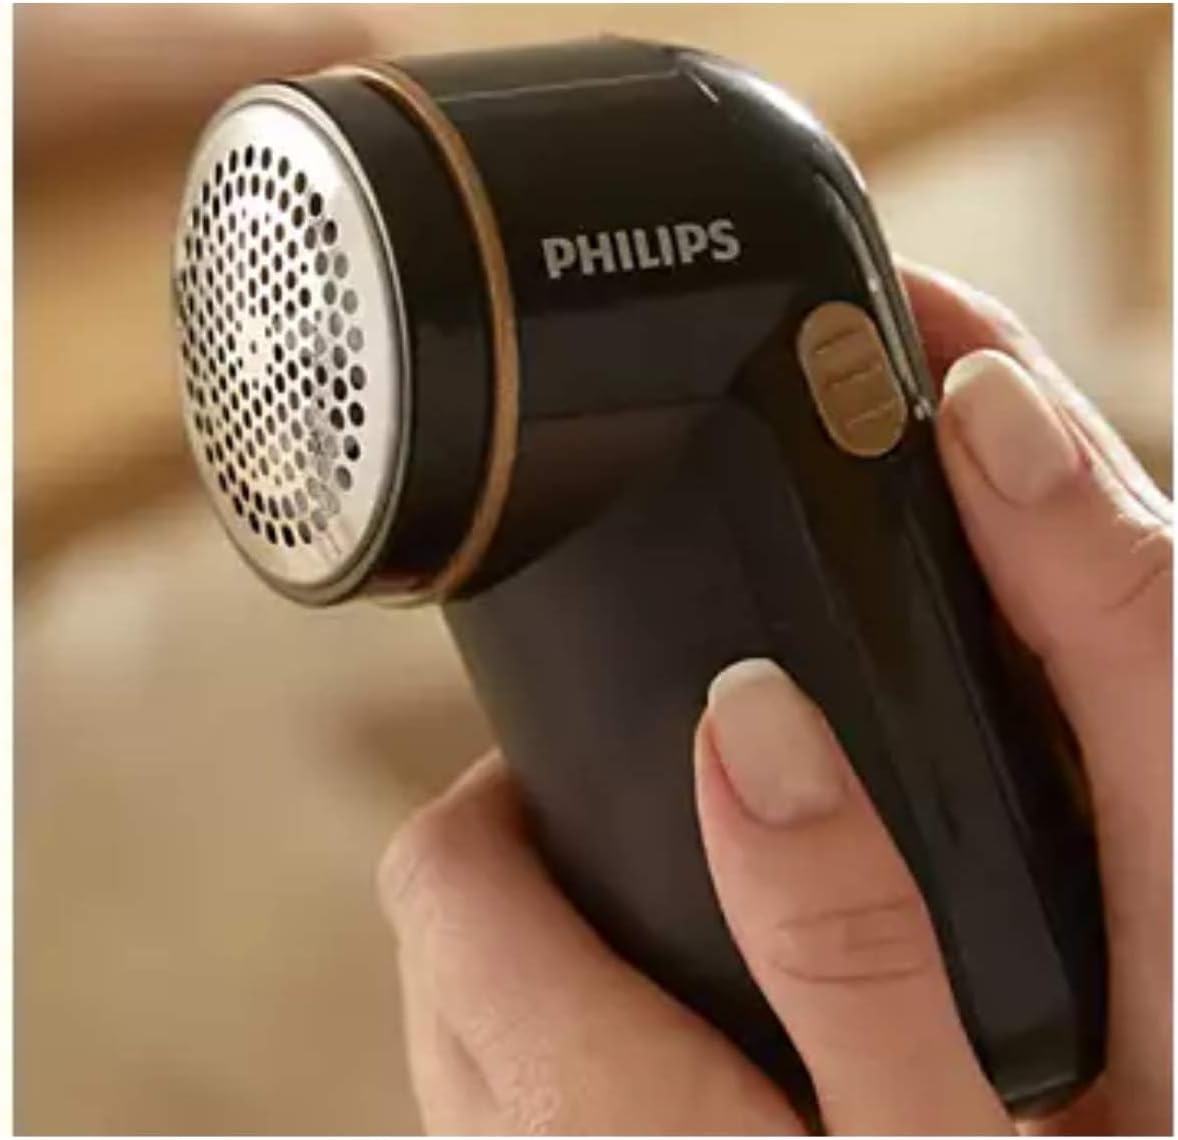 Philips Fabric Shaver – Removes Fabric Pills, Suitable for all Garments, Batteries Included - GC026/80